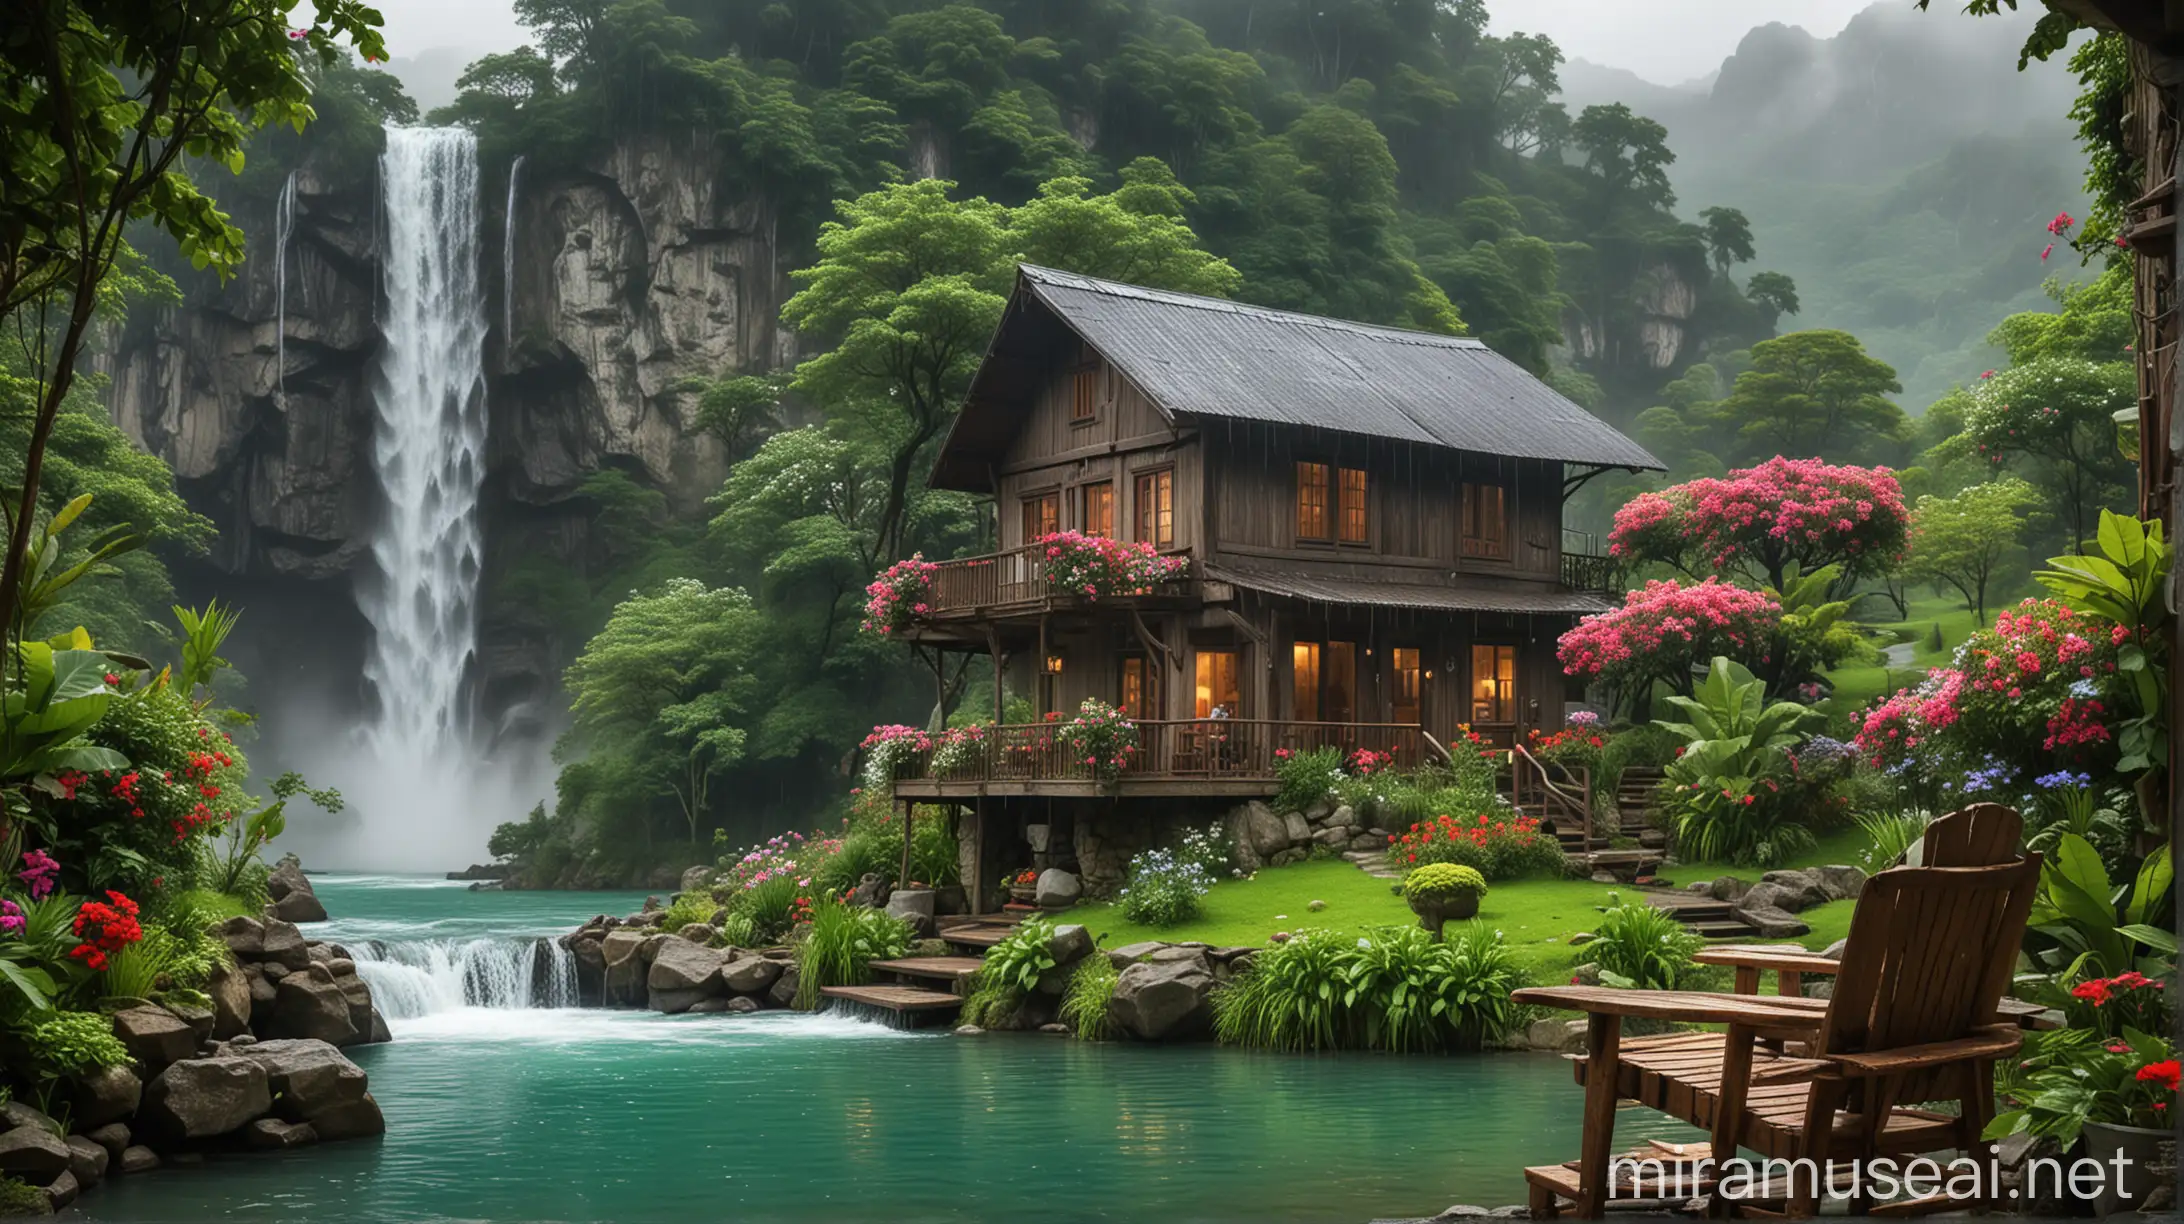 moonsoon rainy weather old style house at mountain view with flowers and waterfall and sitting chairs a waterfall with a hut and a lake, in the style of 32k uhd, moonsoon emerald and green, colorful dreams, romantic riverscapes, beautiful scenery waterfall view, a lake, in the style of 32k uhd, green, colorful dreams, romantic riverscapes, swiss style, mist, highly polished surfaces Fantastic old style houses with background waterfall in the mountain old style houses office seamlessly integrated into a lush jungle, cascading waterfall in the background rainy weather sitting chairs